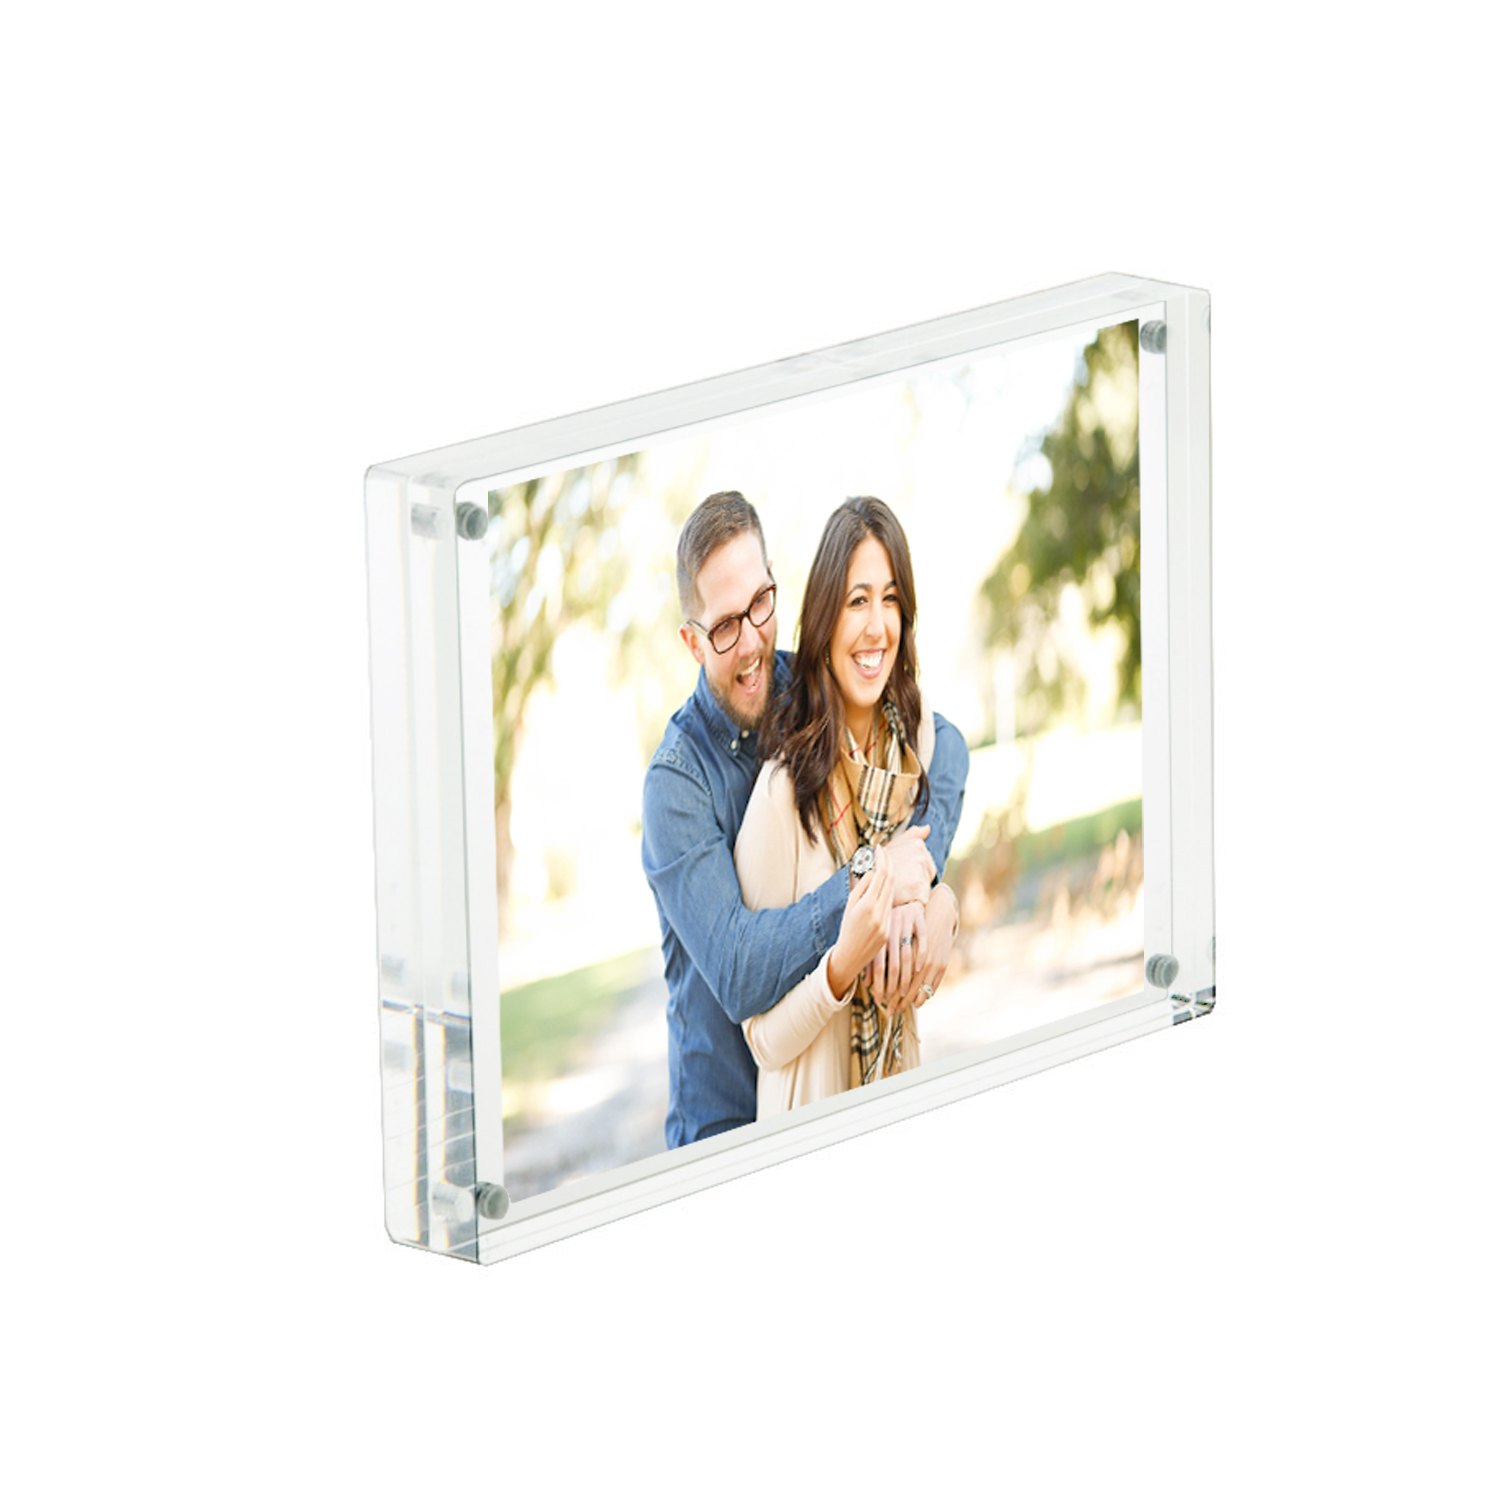  3  5  x  5  Magnetic Acrylic  Picture Frame  Plexiglass 